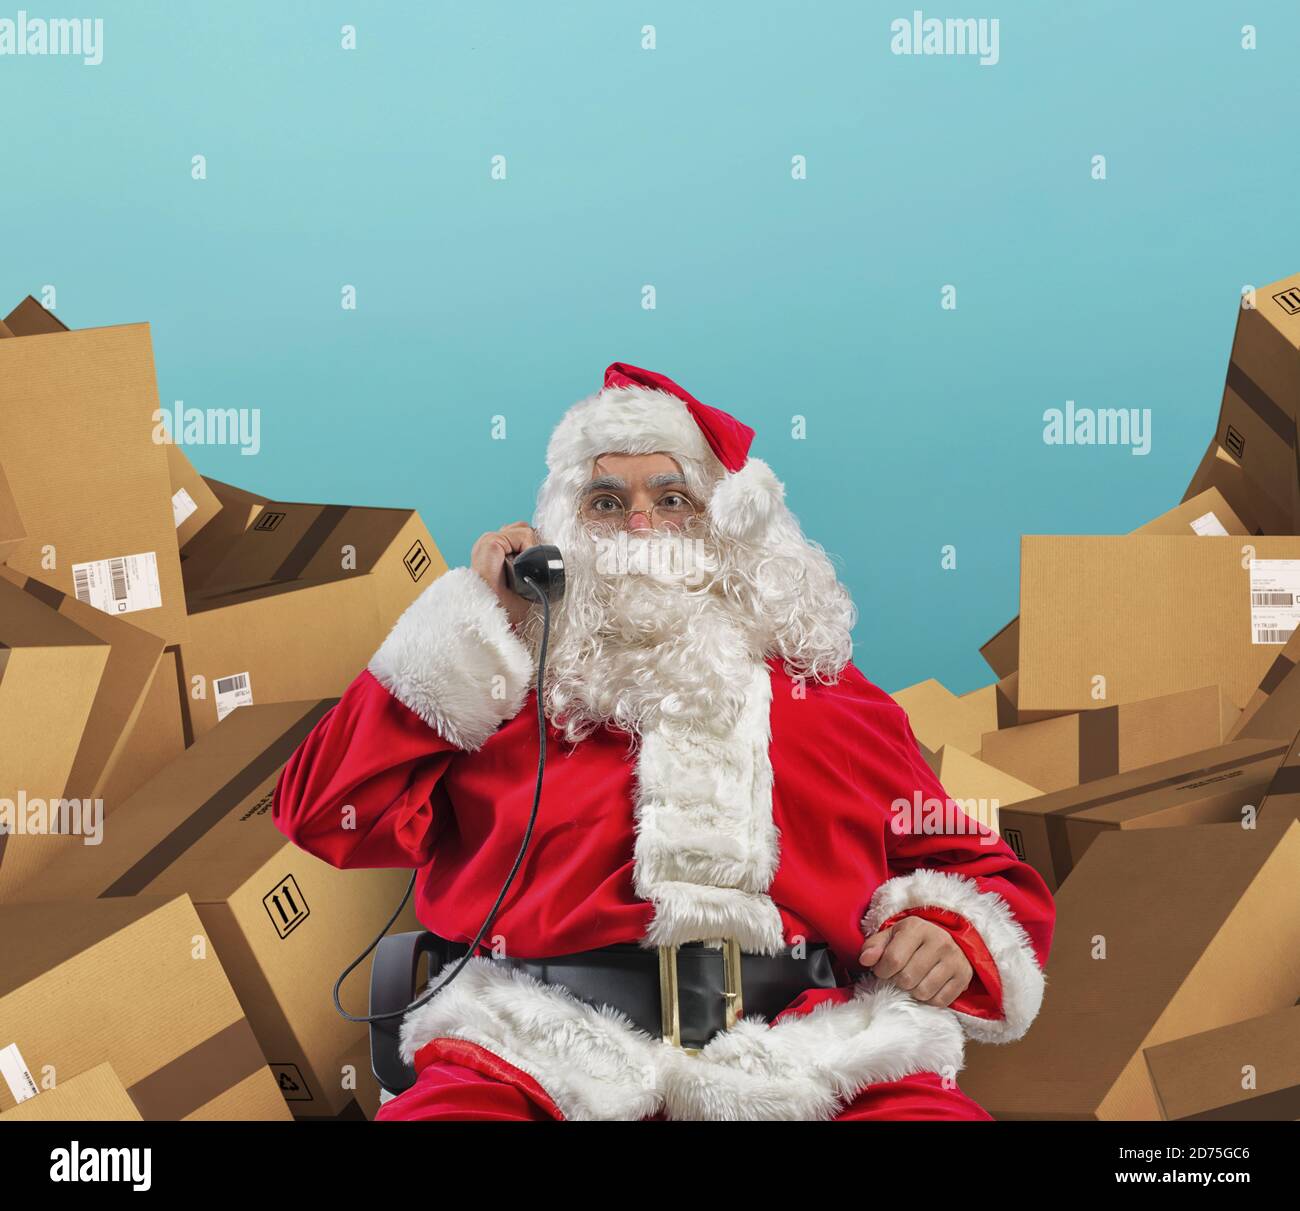 Santa Claus receives telephone calls for presents request Stock Photo